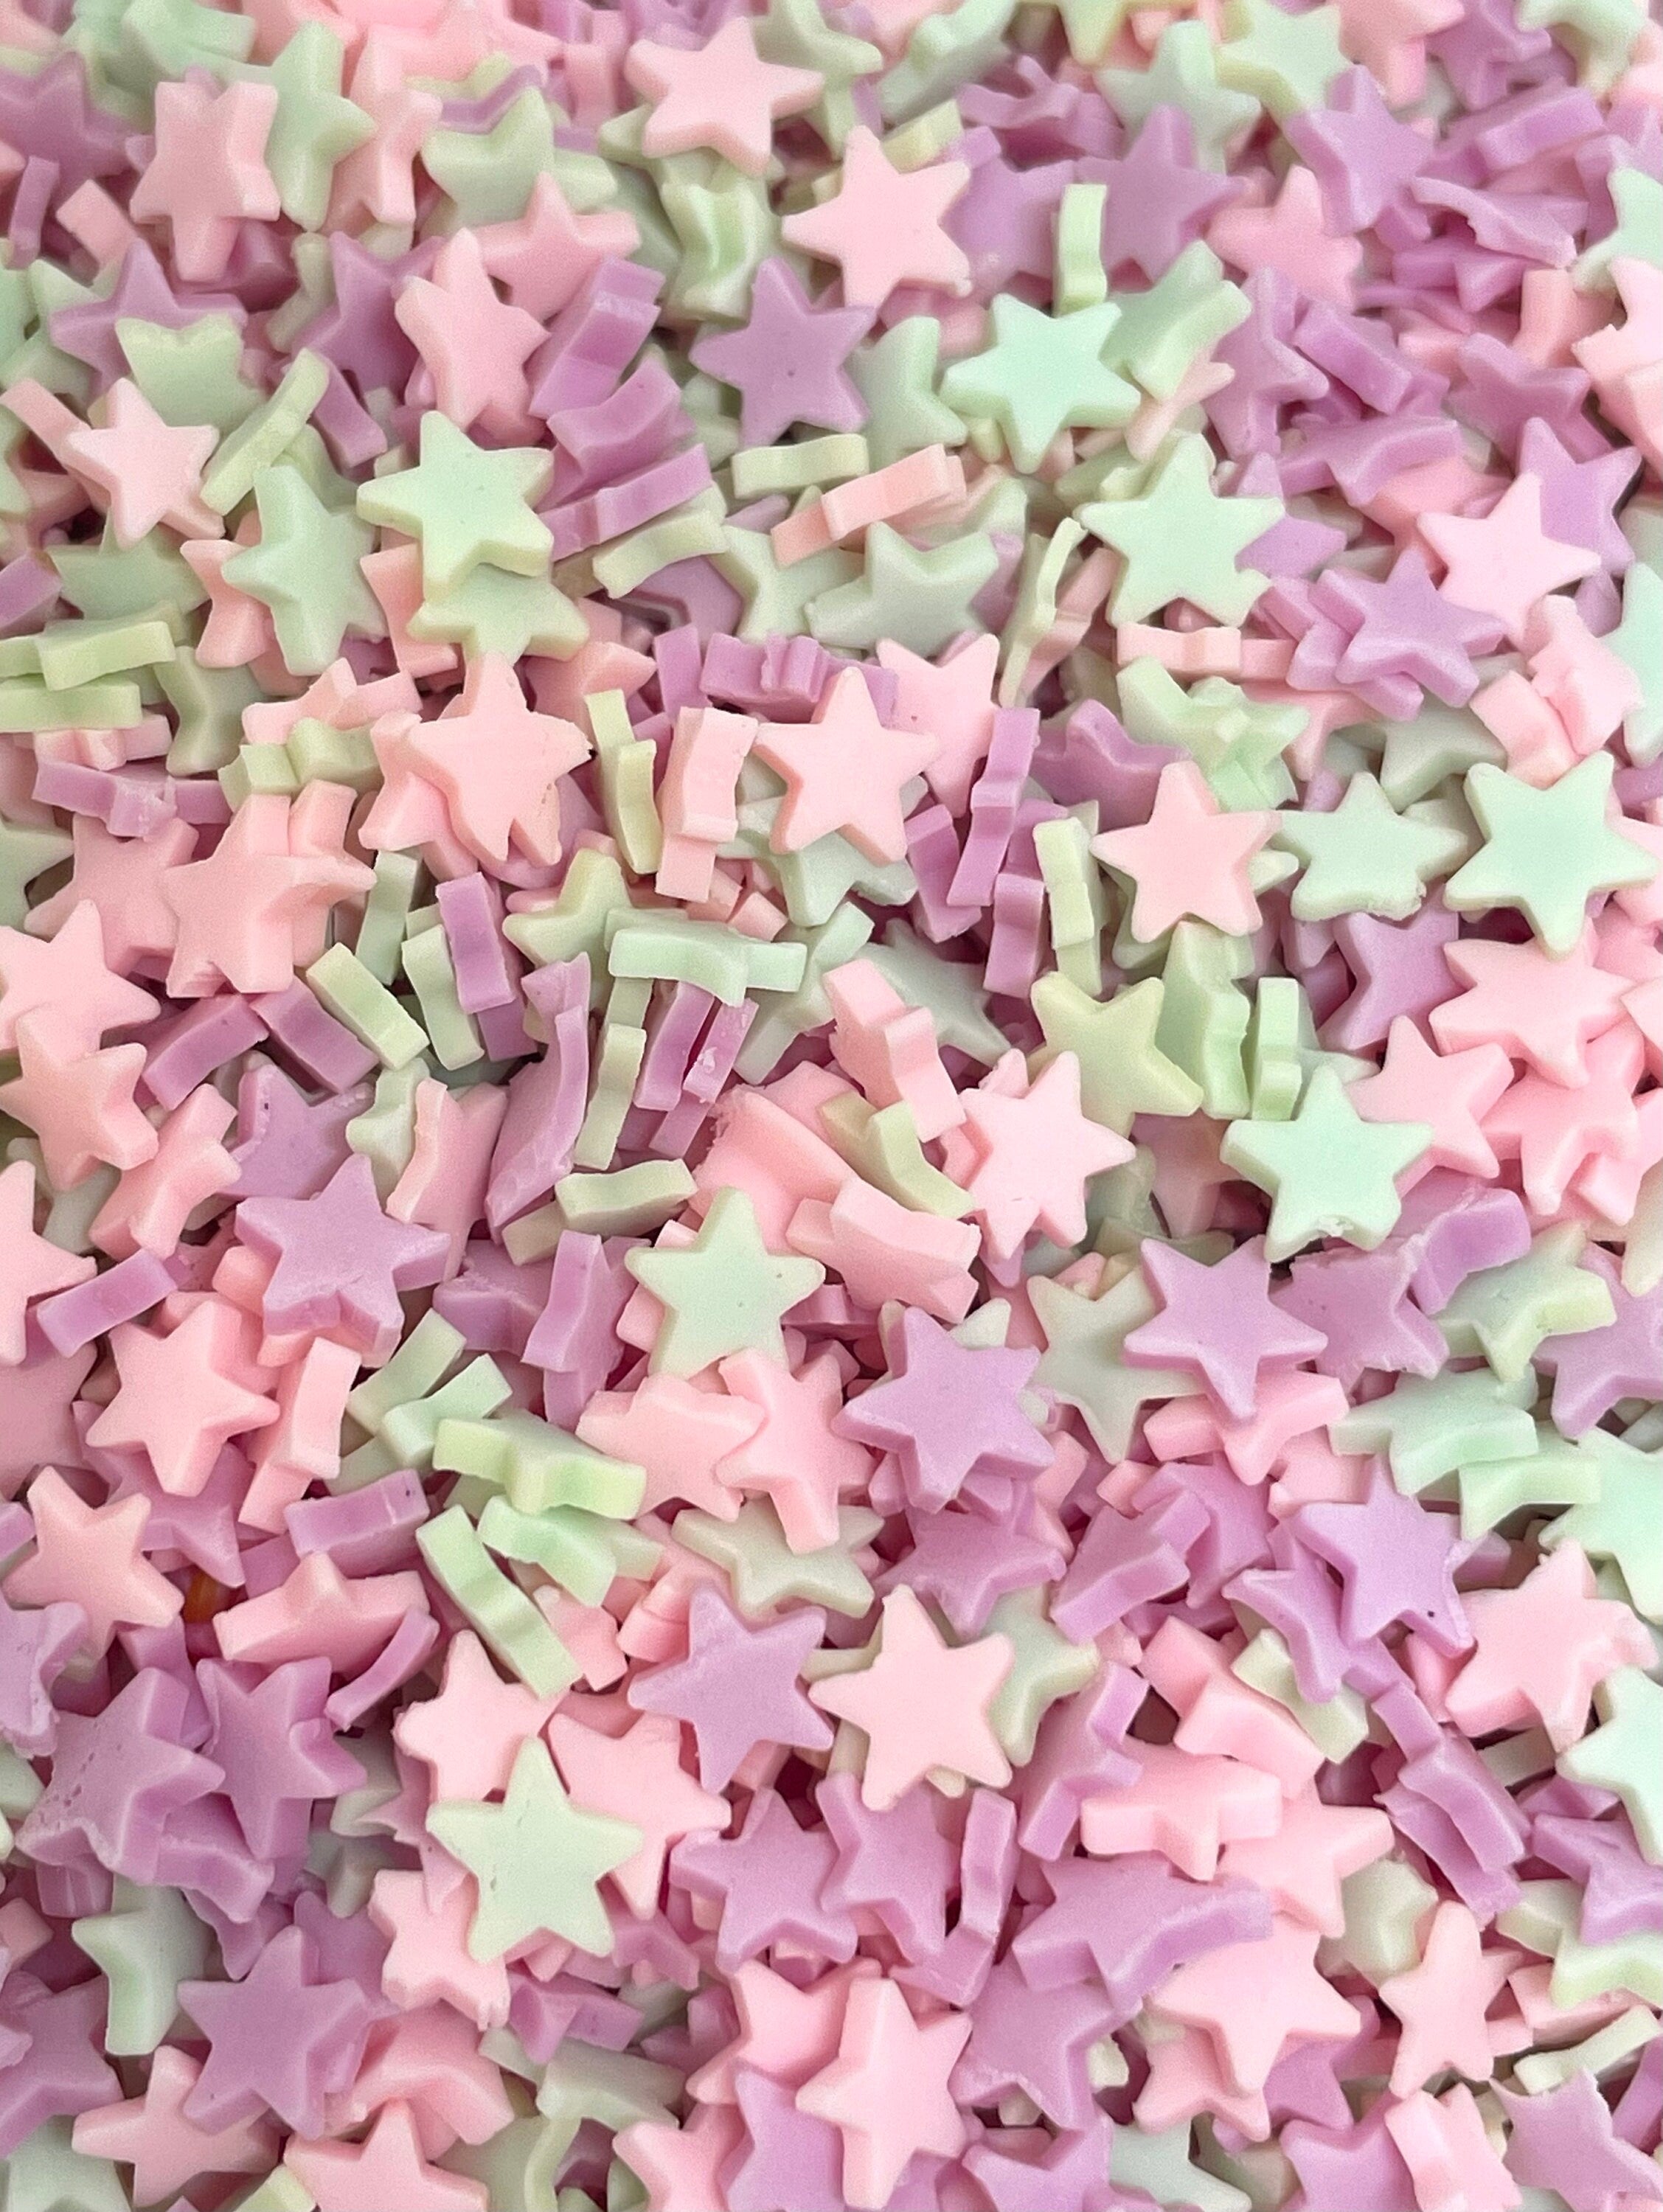 Fake Pastel Star Sprinkles, Polymer Clay Faux Toppings, Slime Add-Ins